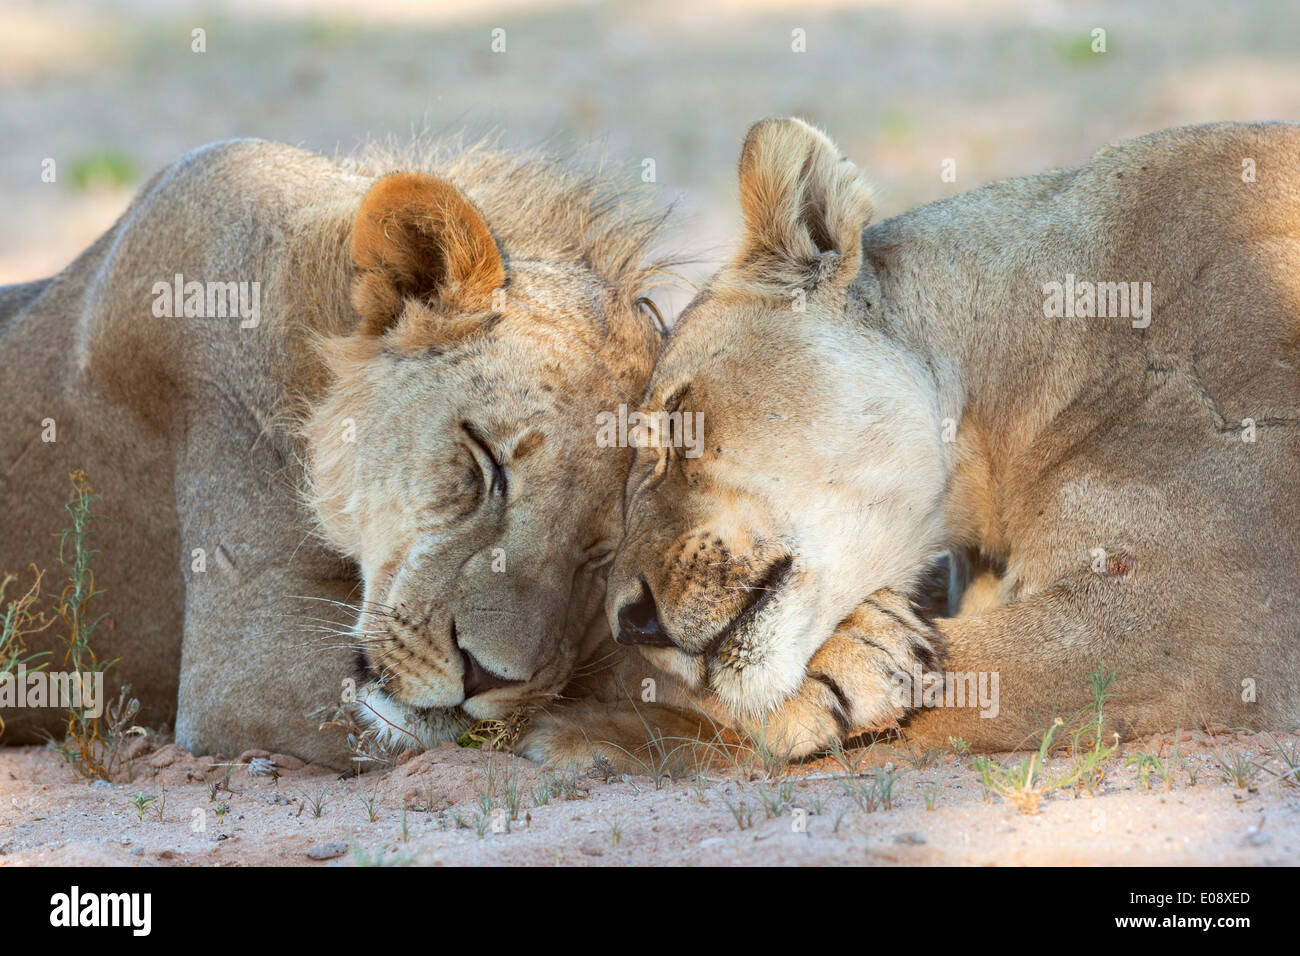 Lion (Panthera leo), pride members resting, Kgalagadi Transfrontier Park, Northern Cape, South Africa, February 2014 Stock Photo